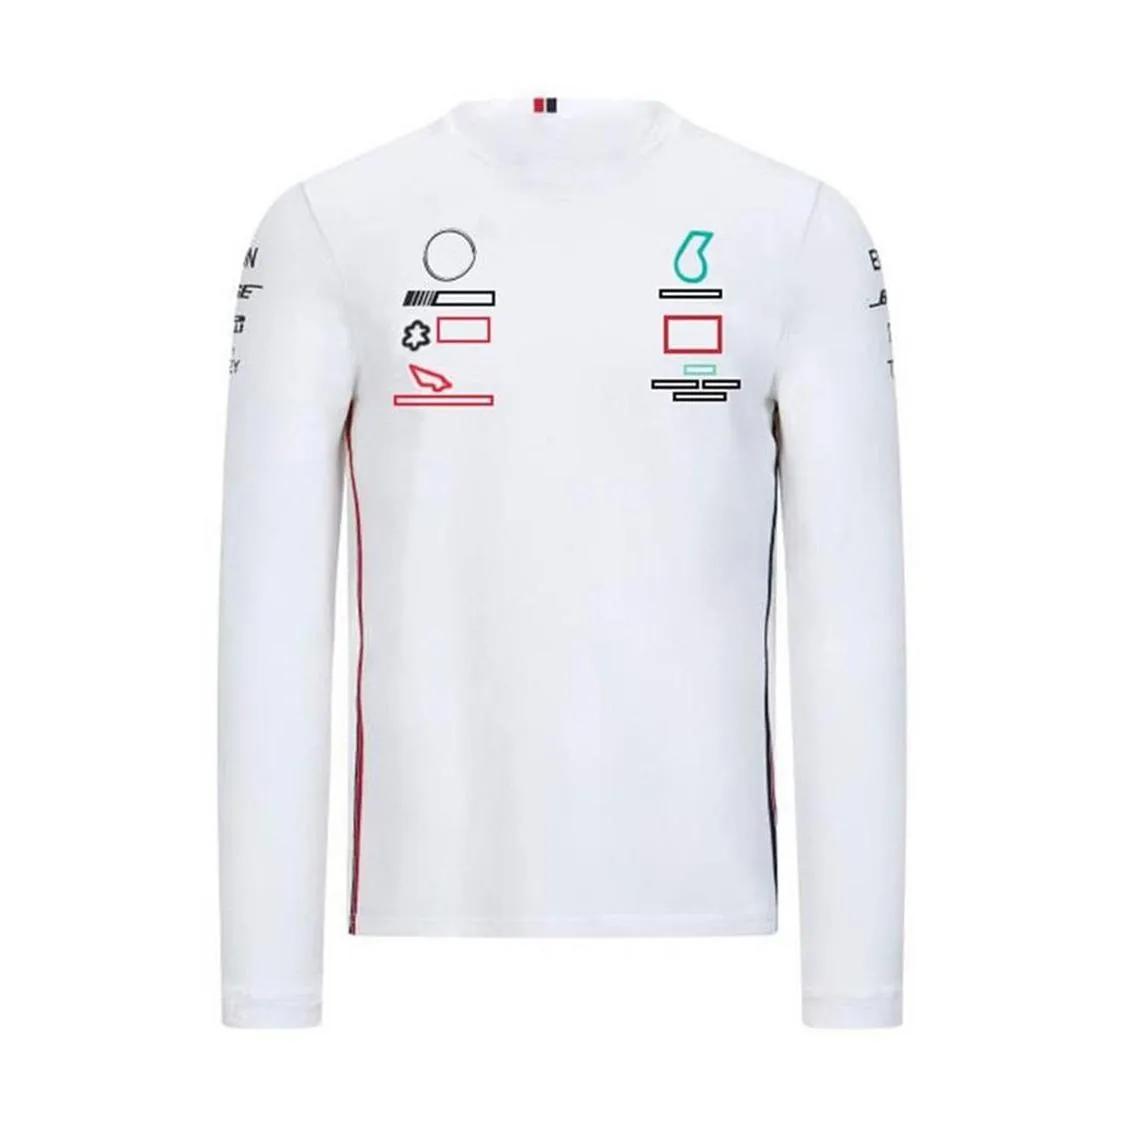 f1 team clothing new team racing suit shortsleeved tshirt round neck car overalls customized the same style 2021